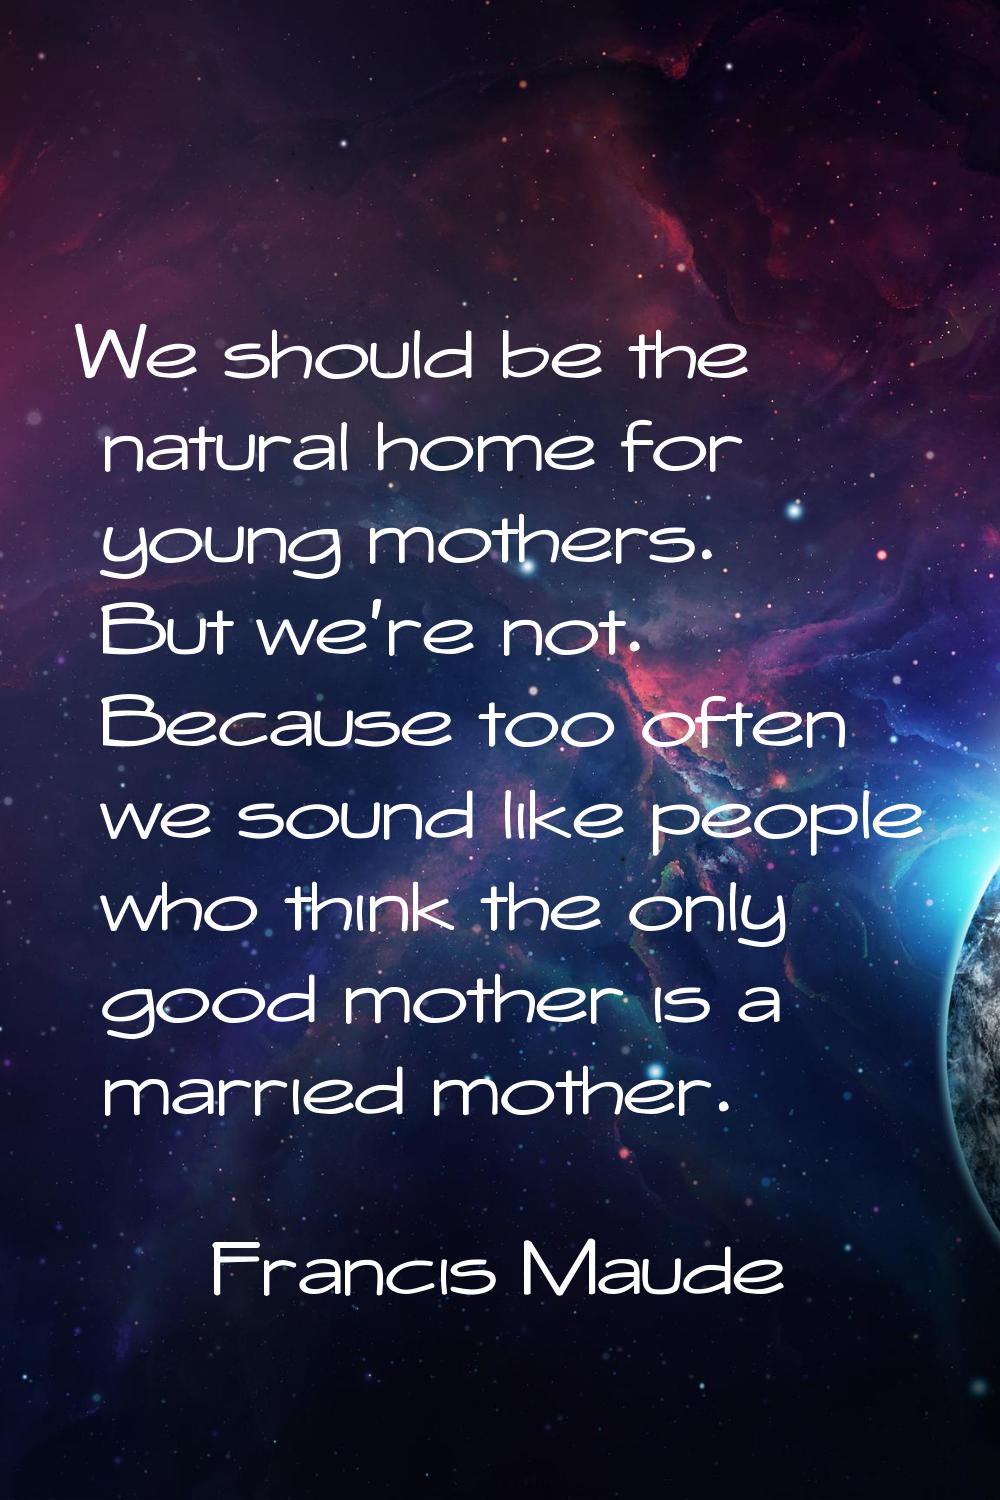 We should be the natural home for young mothers. But we're not. Because too often we sound like peo